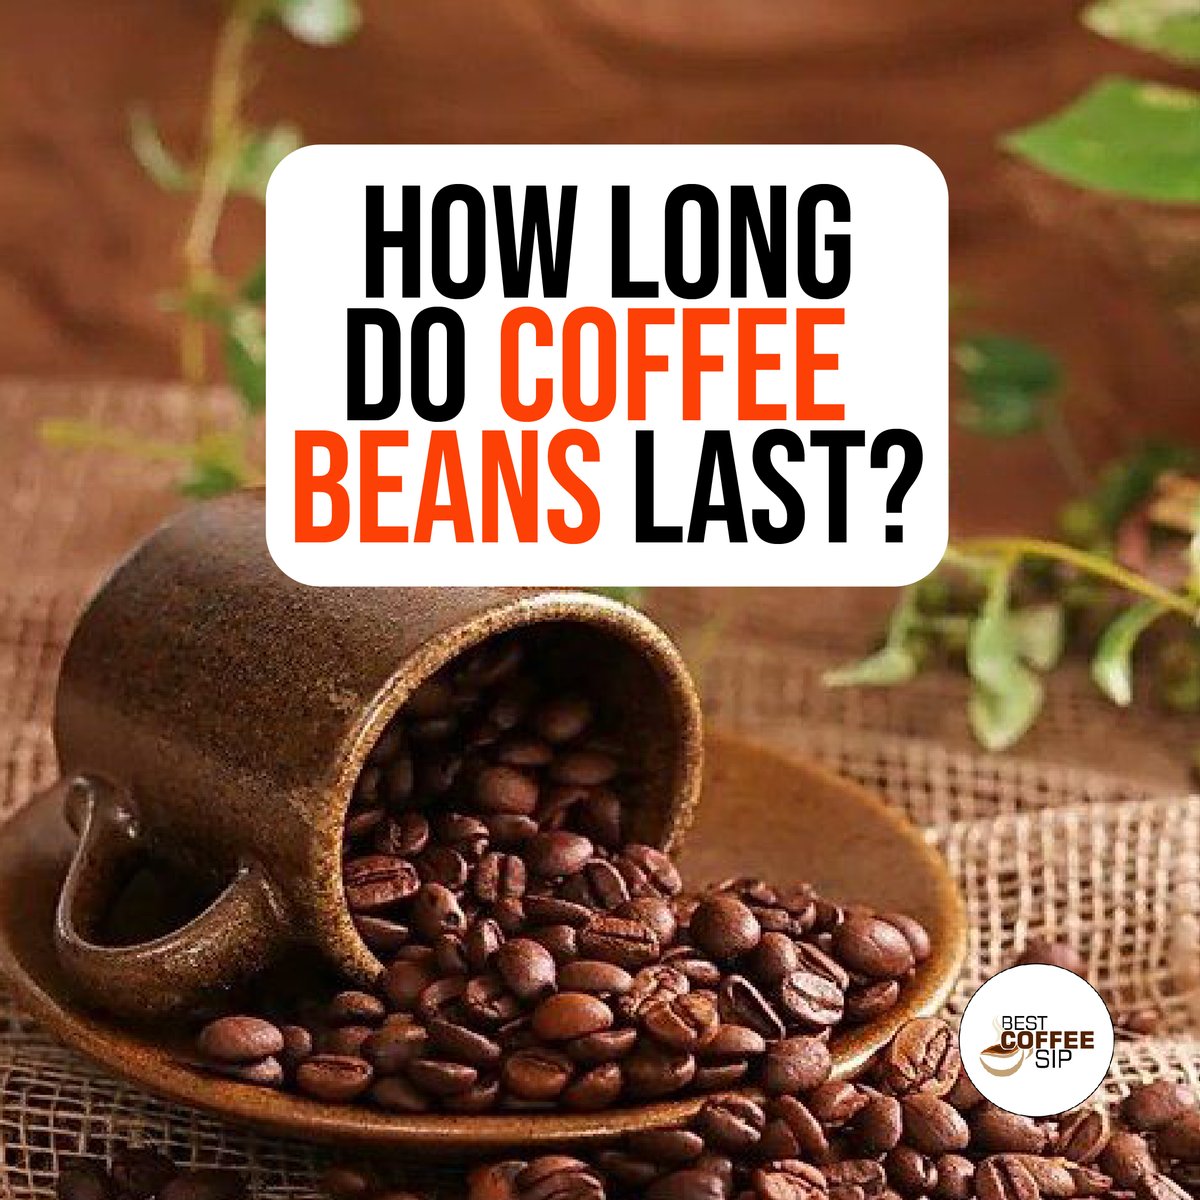 Brewing the perfect cup of coffee starts with fresh beans! ☕️👌 Join us as we decode the mystery behind coffee bean freshness and learn how to savor the flavor.

For Learn More: bestcoffeesip.com/how-long-do-co…

#Coffee #CoffeeLovers #UnlockTheMystery #BeanSecrets #CoffeeAddict #mnwild